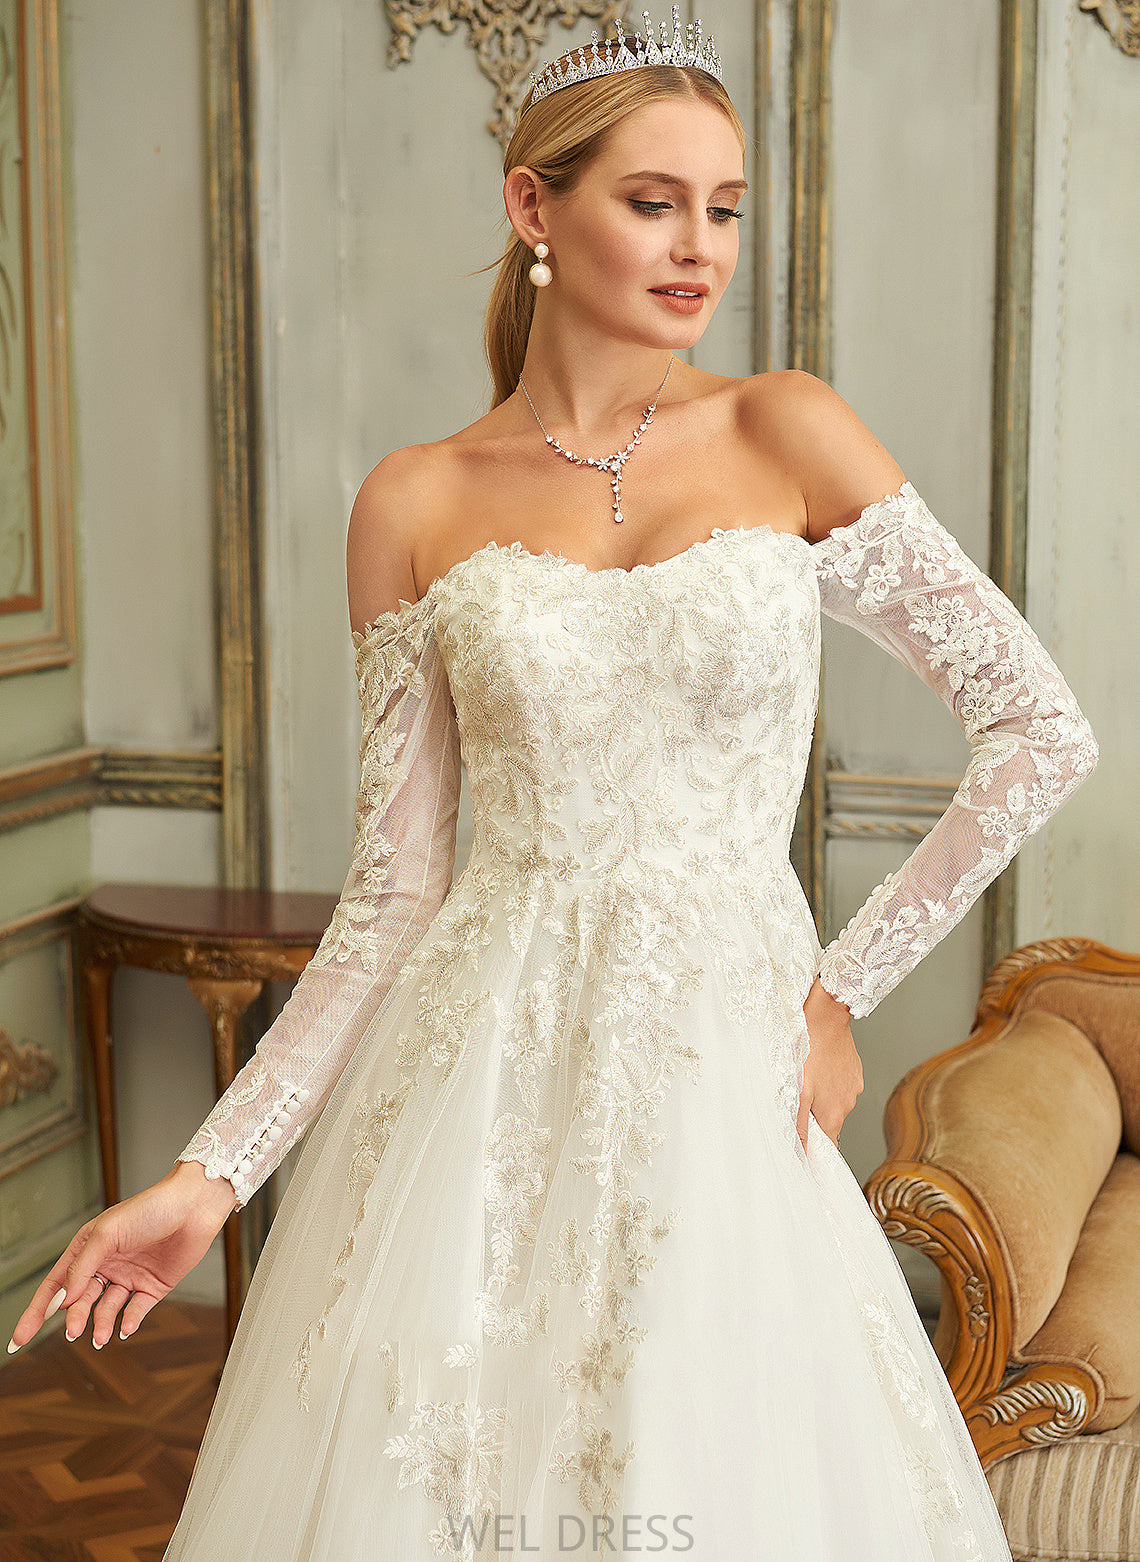 Dress Lace Off-the-Shoulder With Sarahi Ball-Gown/Princess Wedding Train Tulle Lace Wedding Dresses Sweep